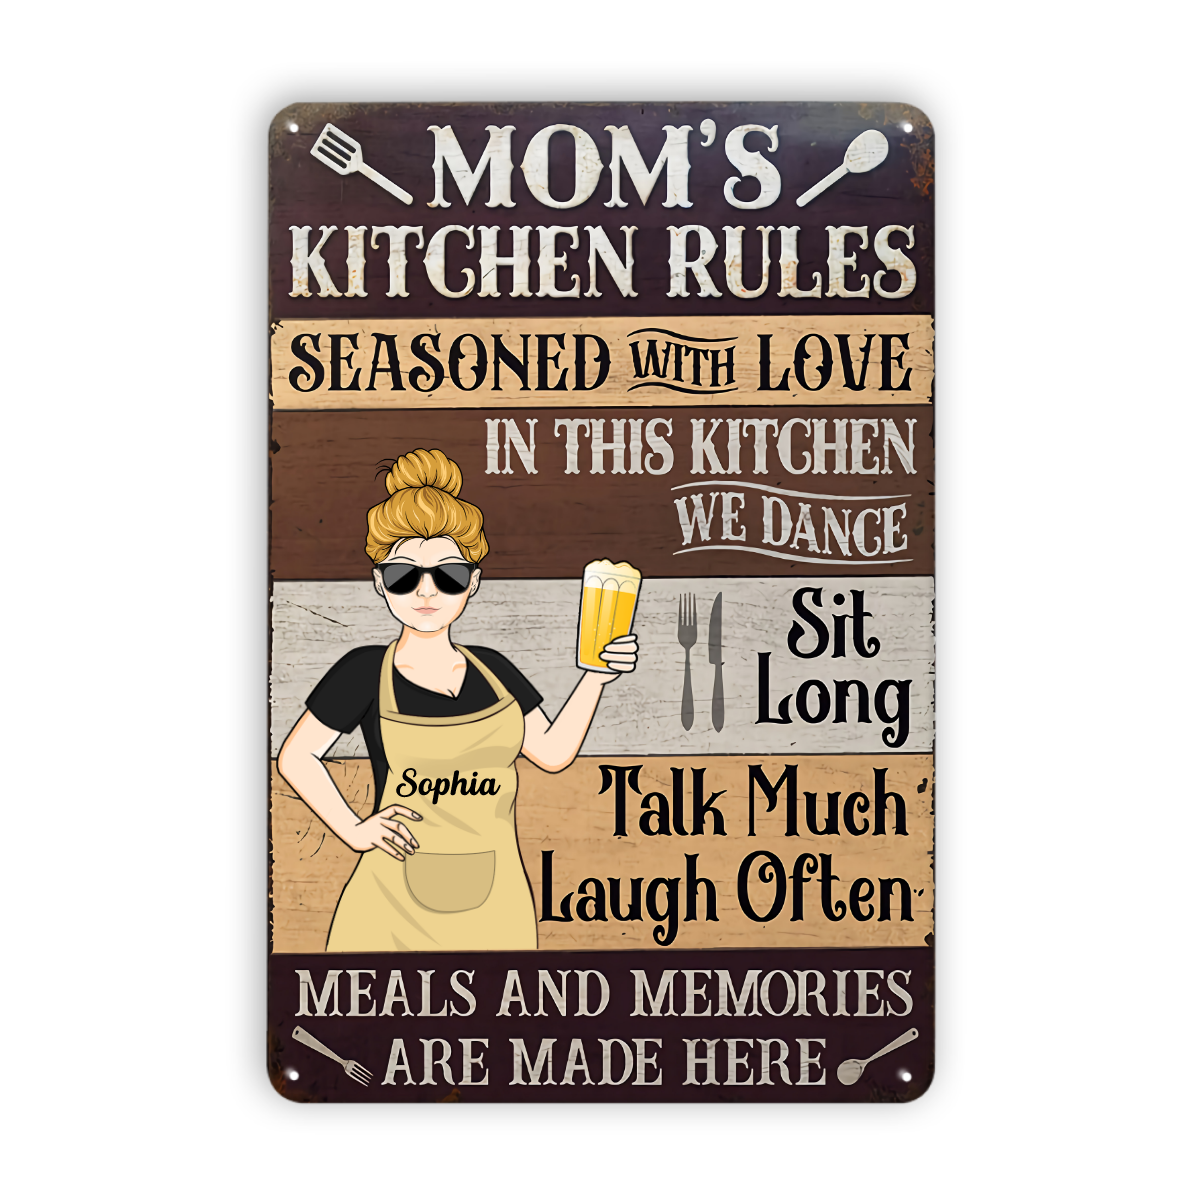 Mom's Kitchen Rules Meals And Memories Are Made Here - Kitchen Sign - Personalized Custom Classic Metal Signs